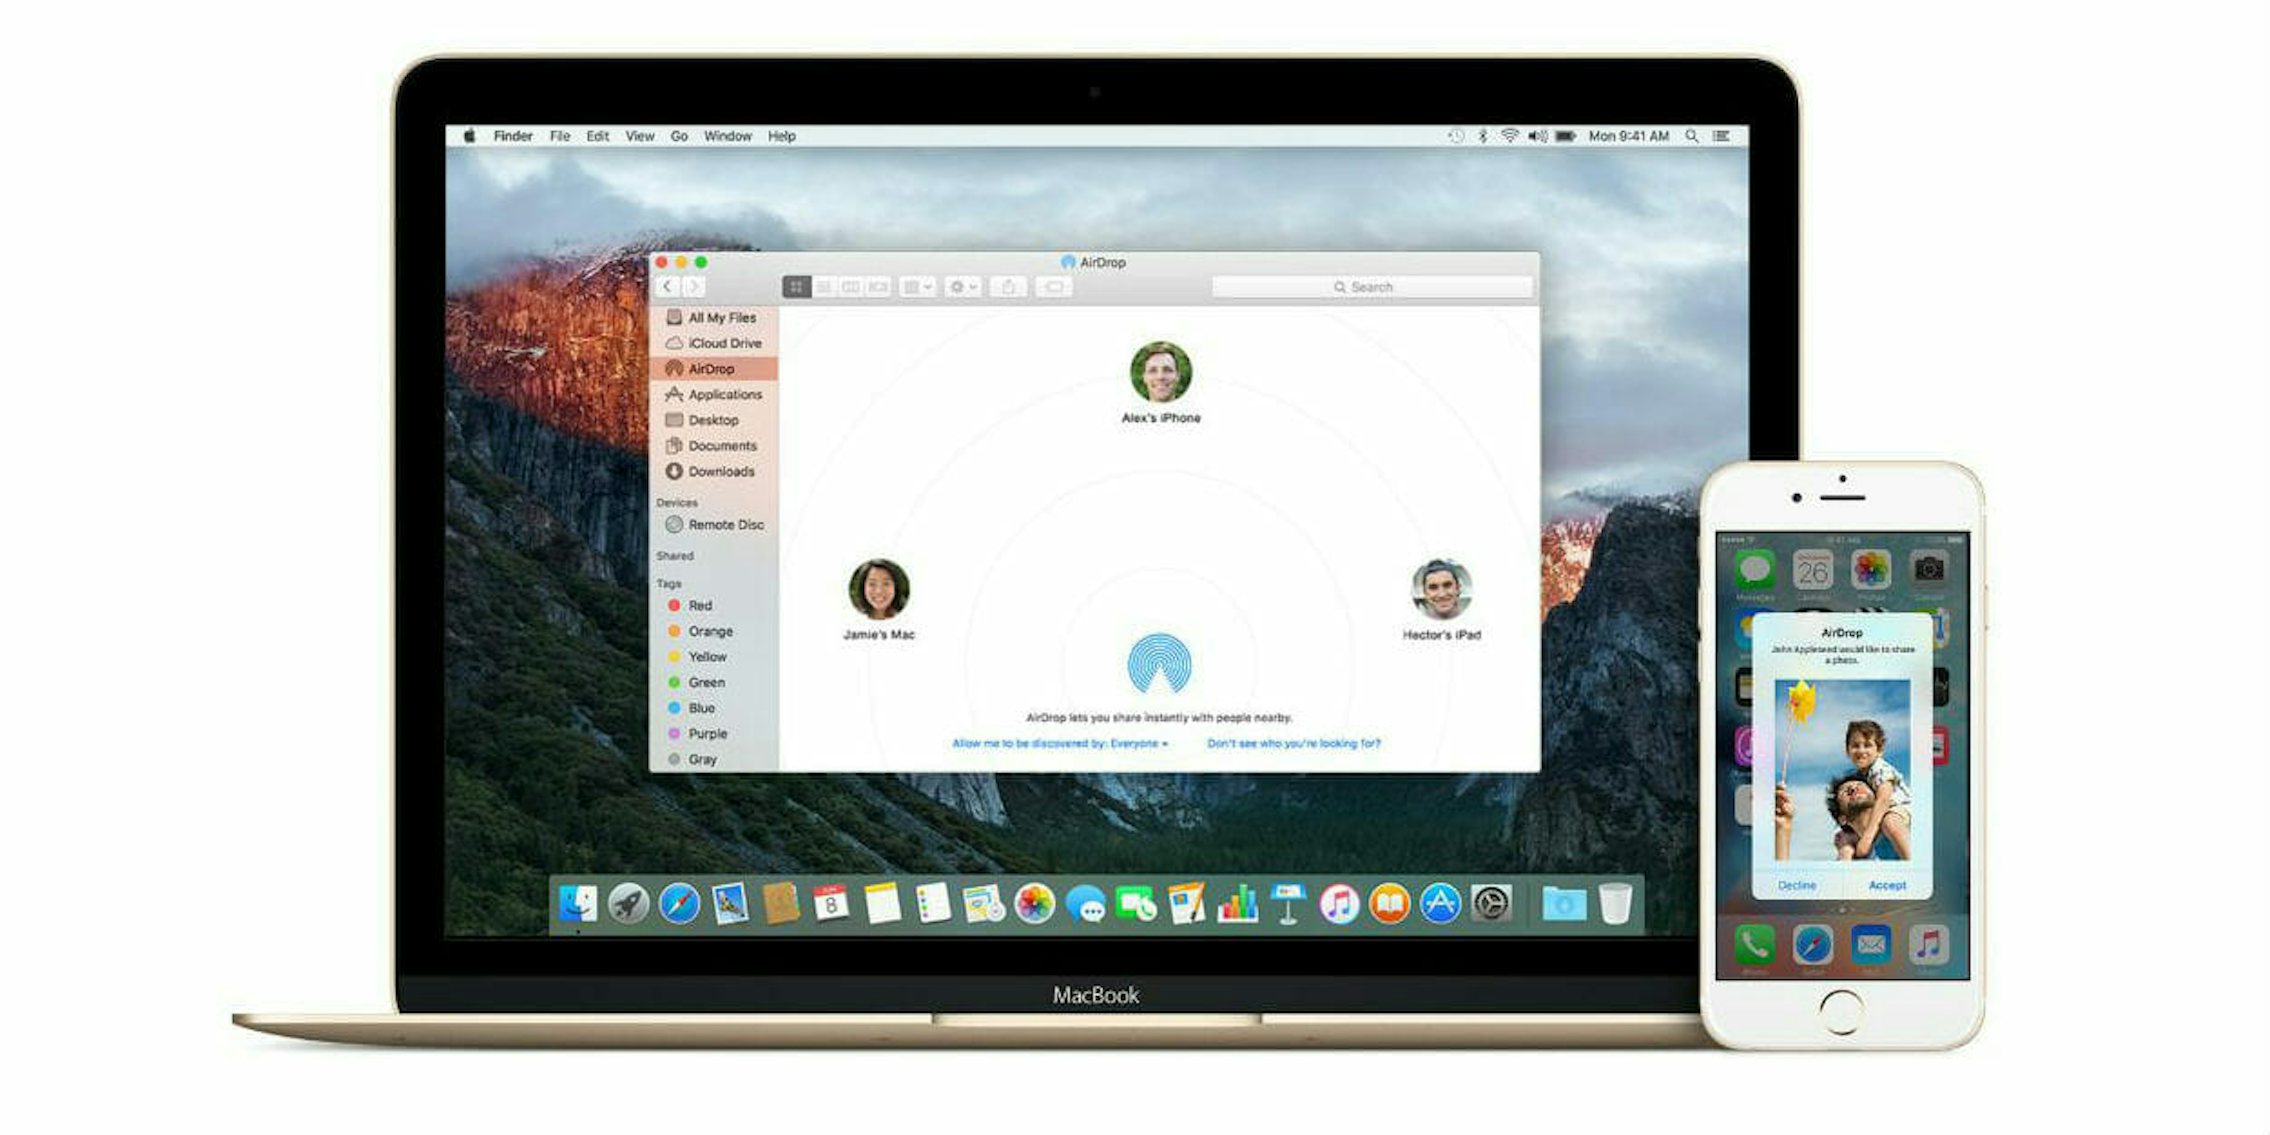 AirDrop: What It Is & How to Turn It On to Share Files & Photos on iPhone,  iPad & Mac